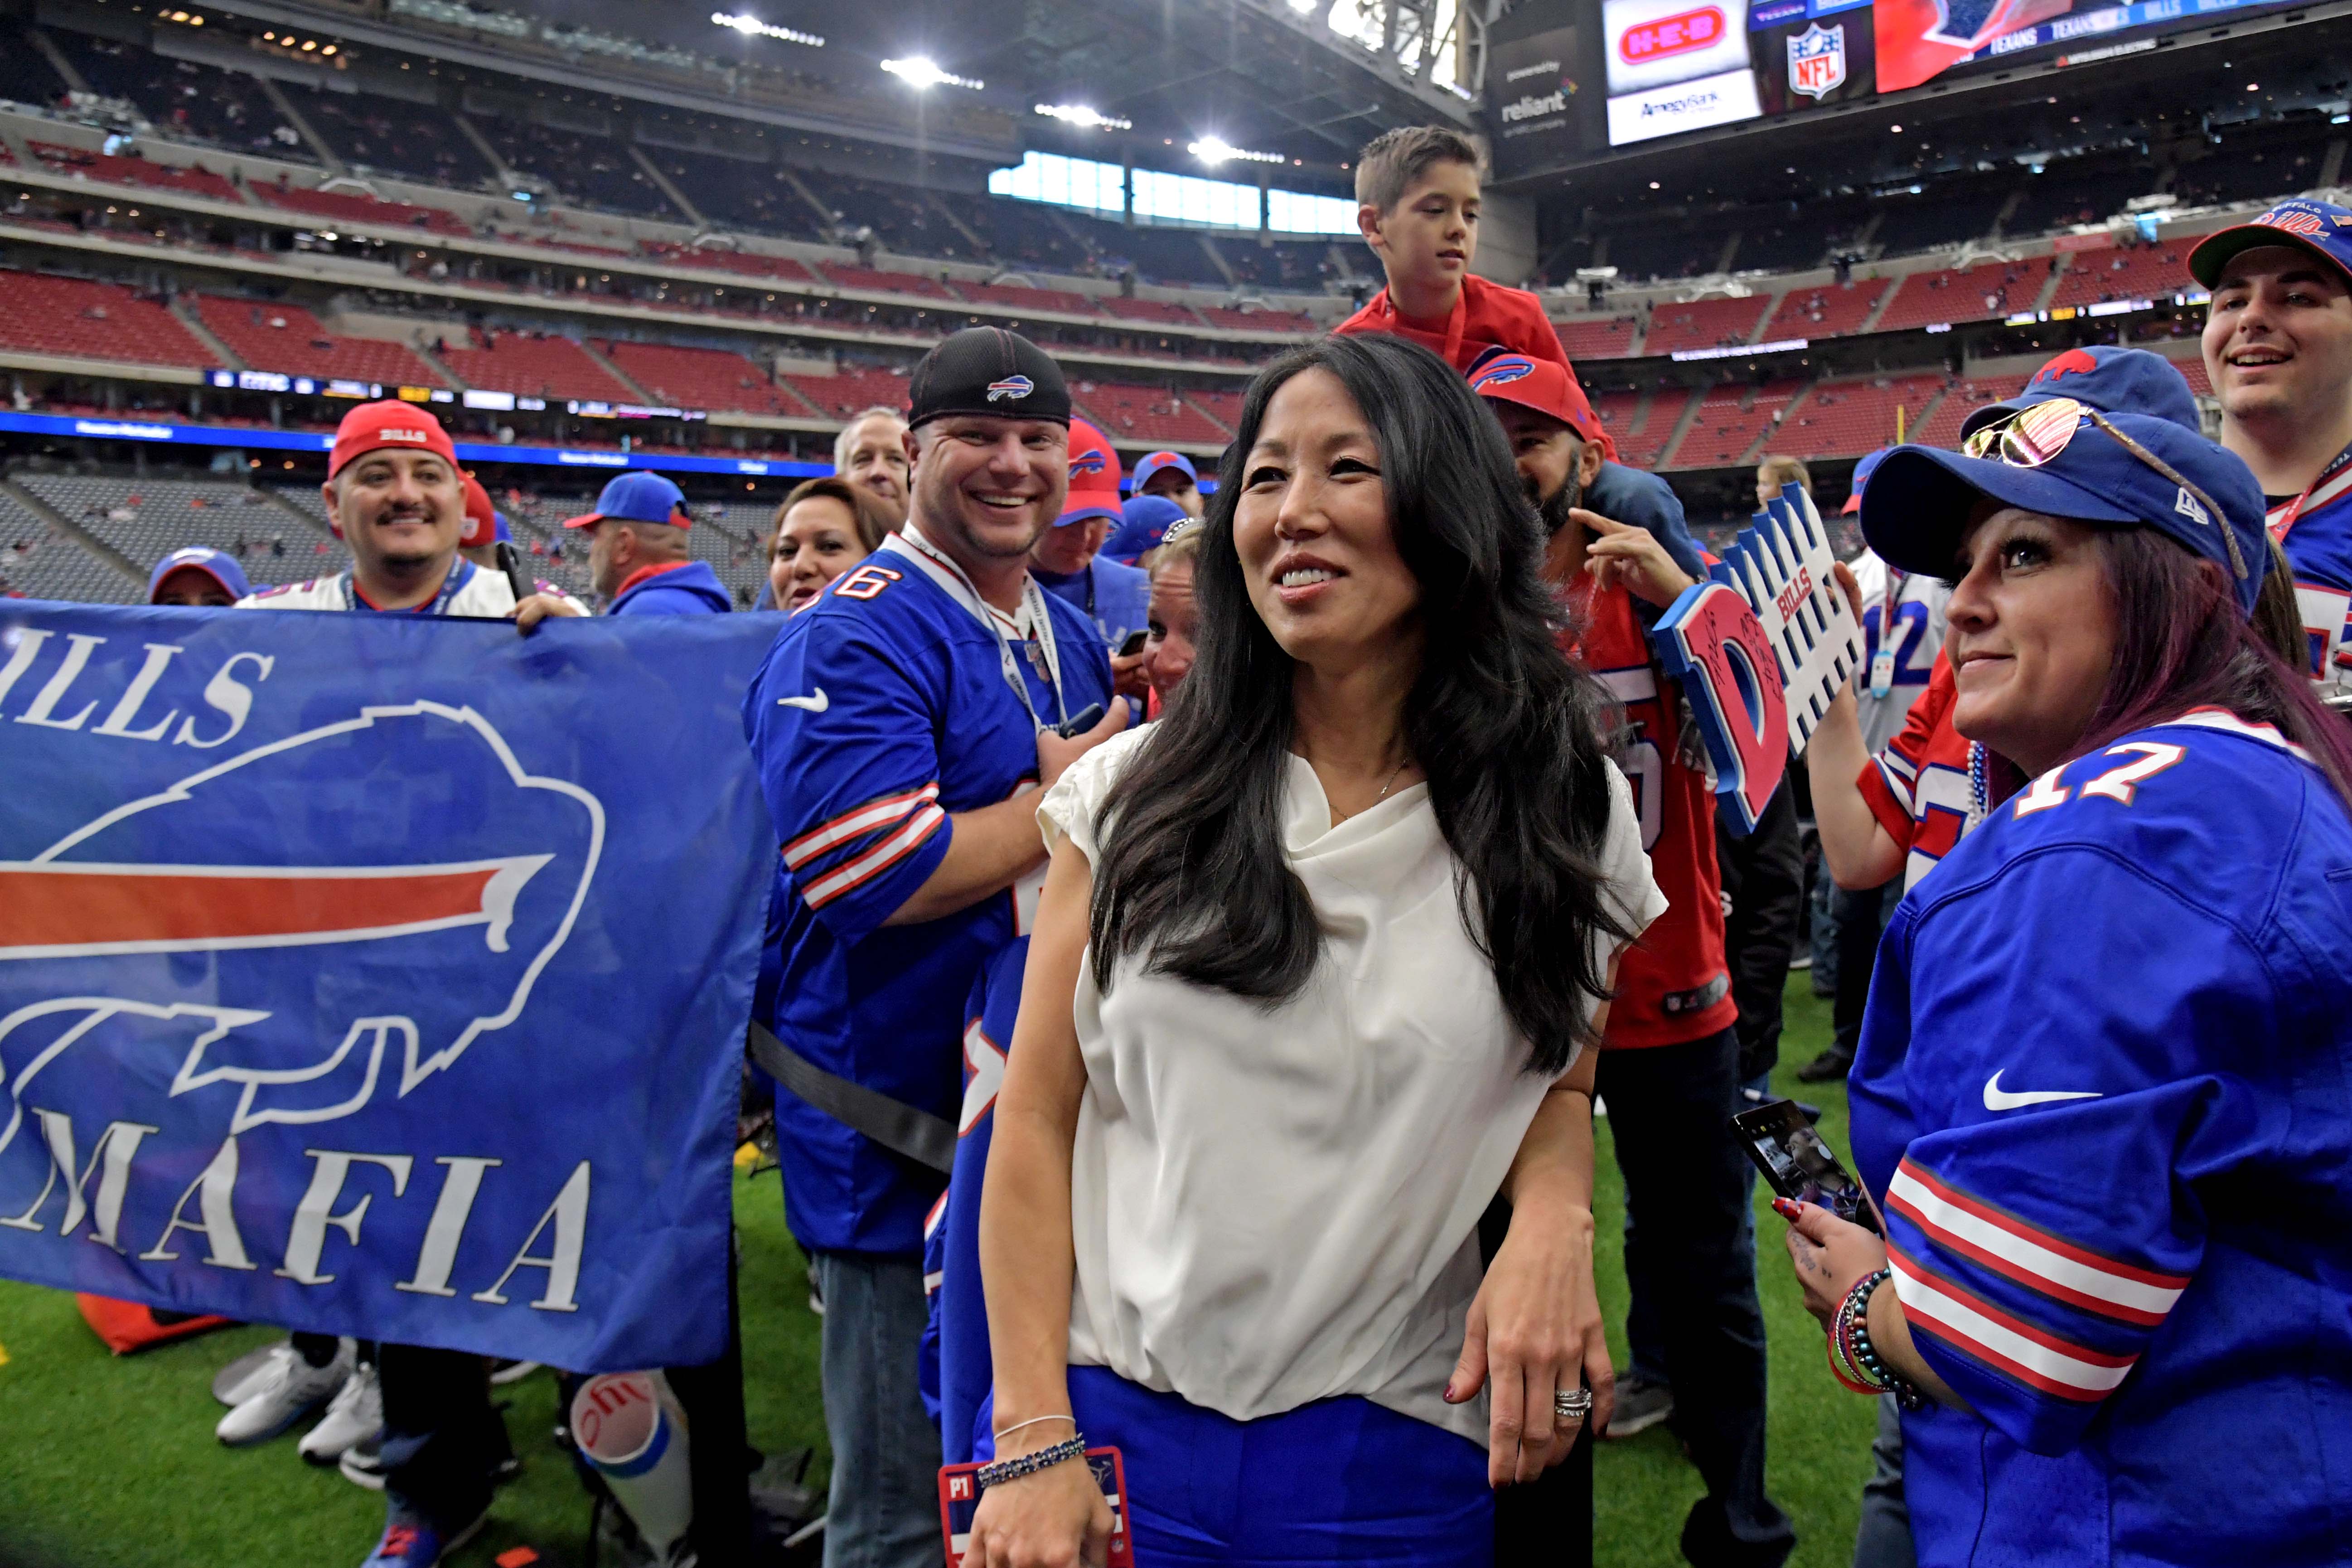 Bills co-owner Kim Pegula's health issues revealed in lengthy update by daughter Jessica Pegula